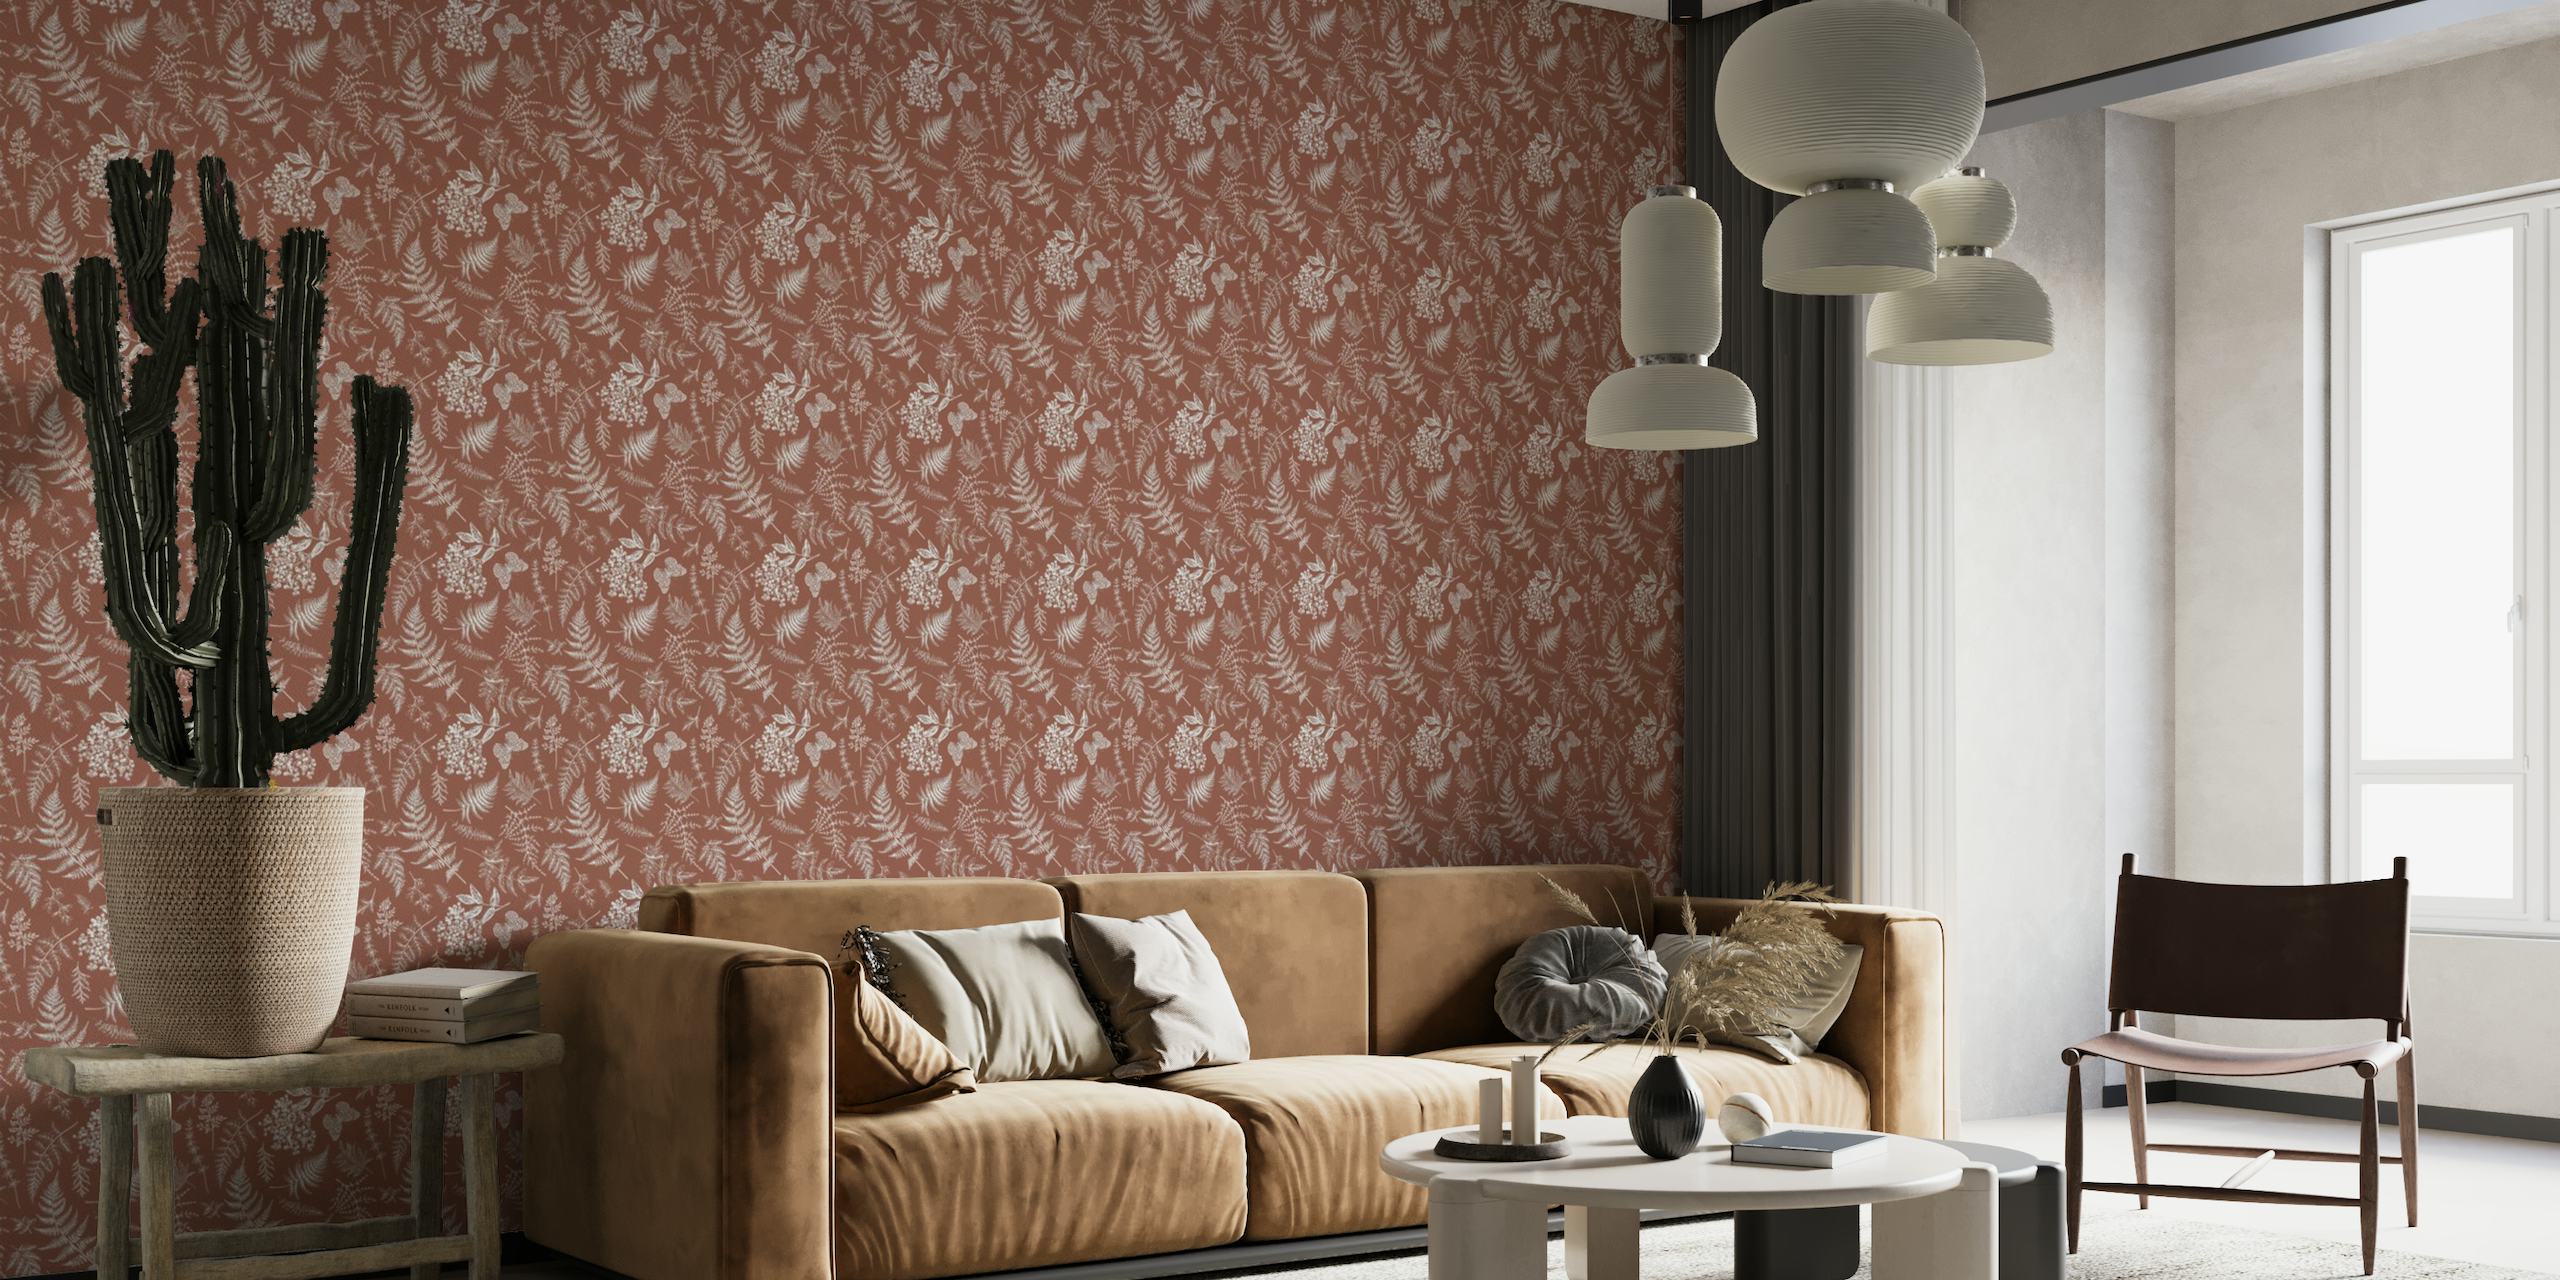 Fern Atmosphere wall mural featuring botanical patterns on a warm background